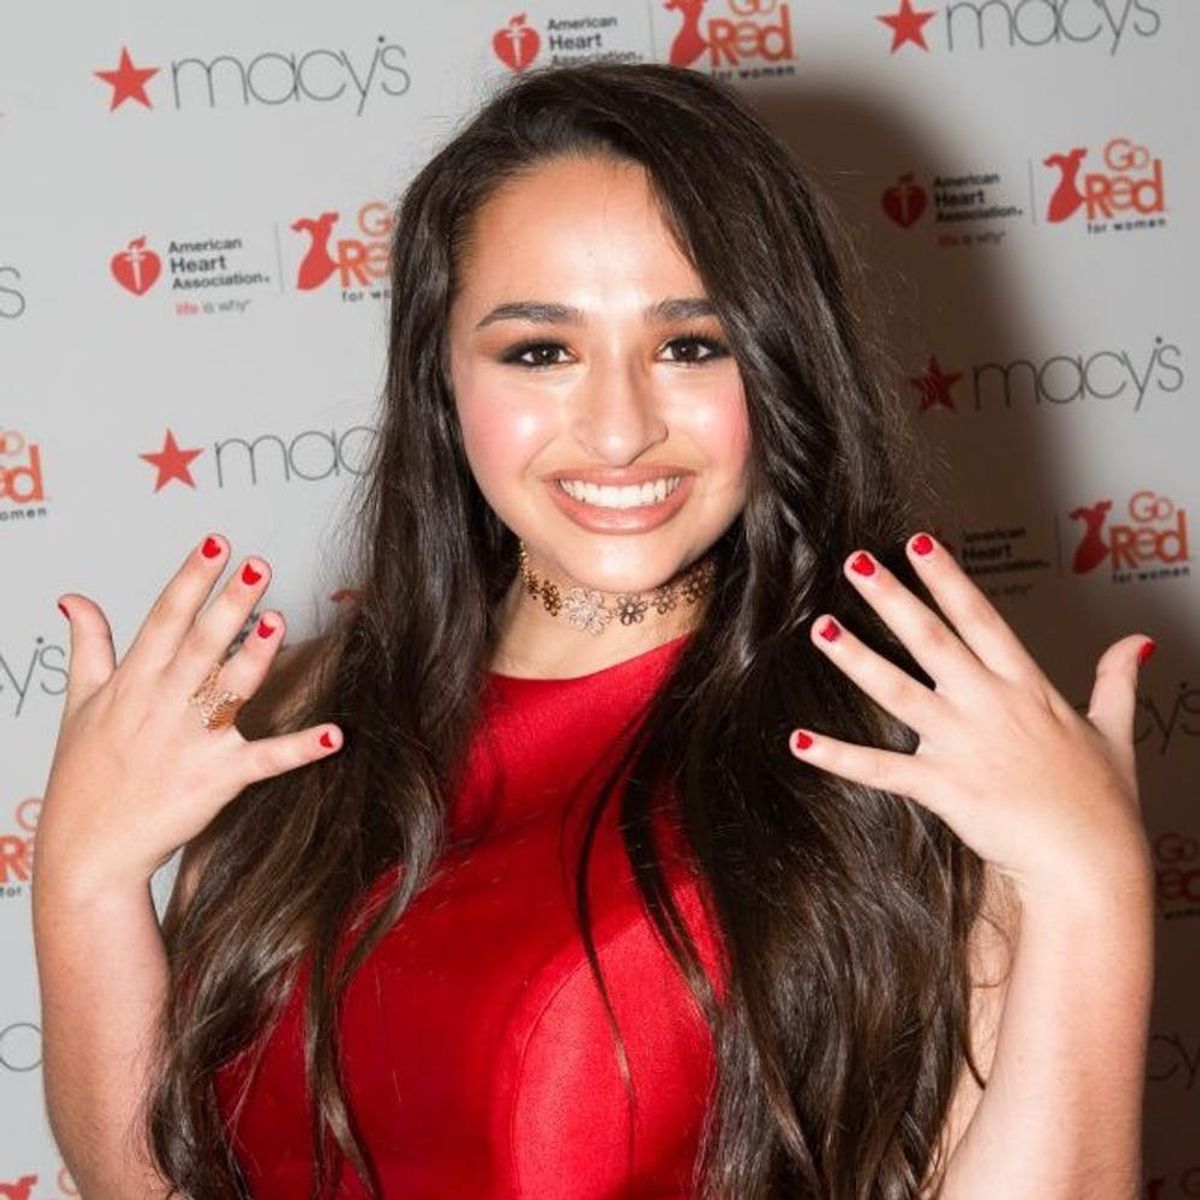 These Celebs’ Manicures Actually Support an Amazing Cause